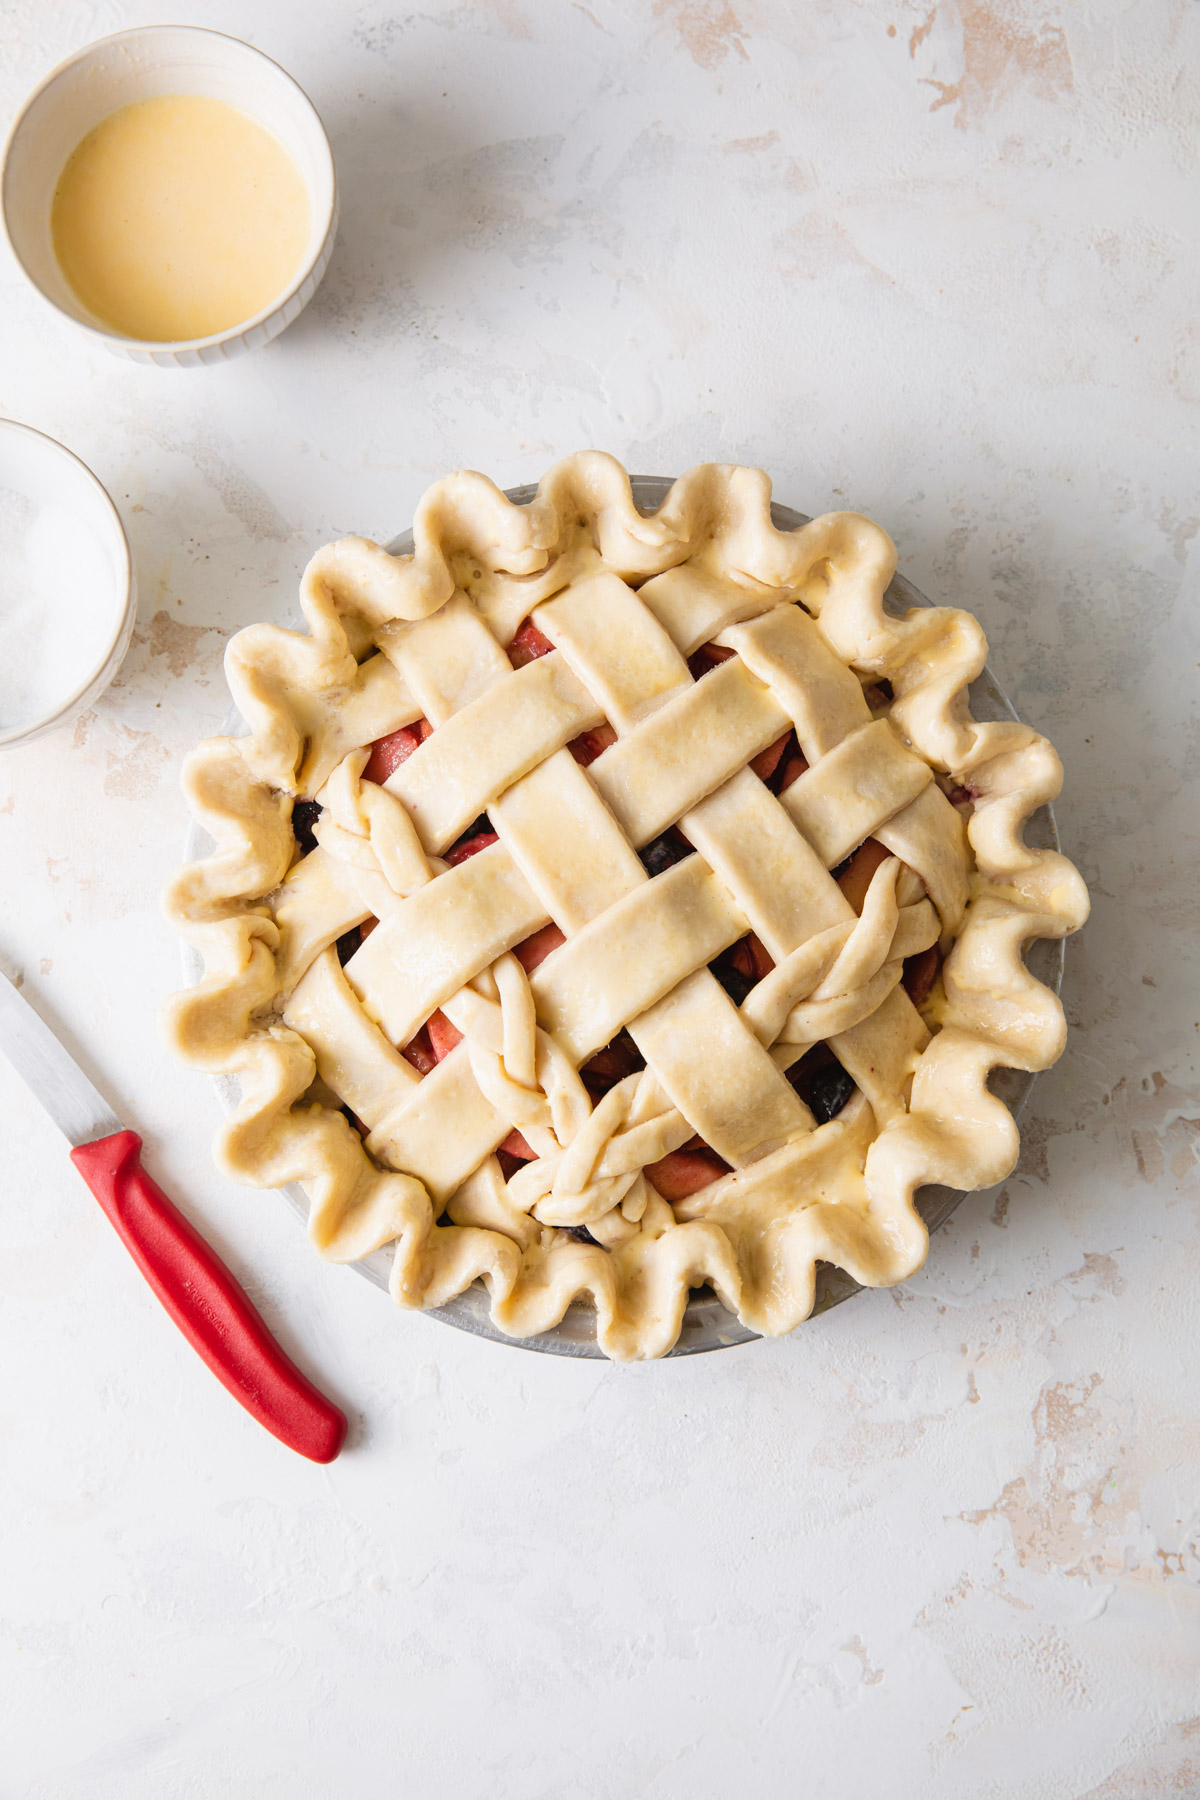 A lattice pie with egg wash on top before baking